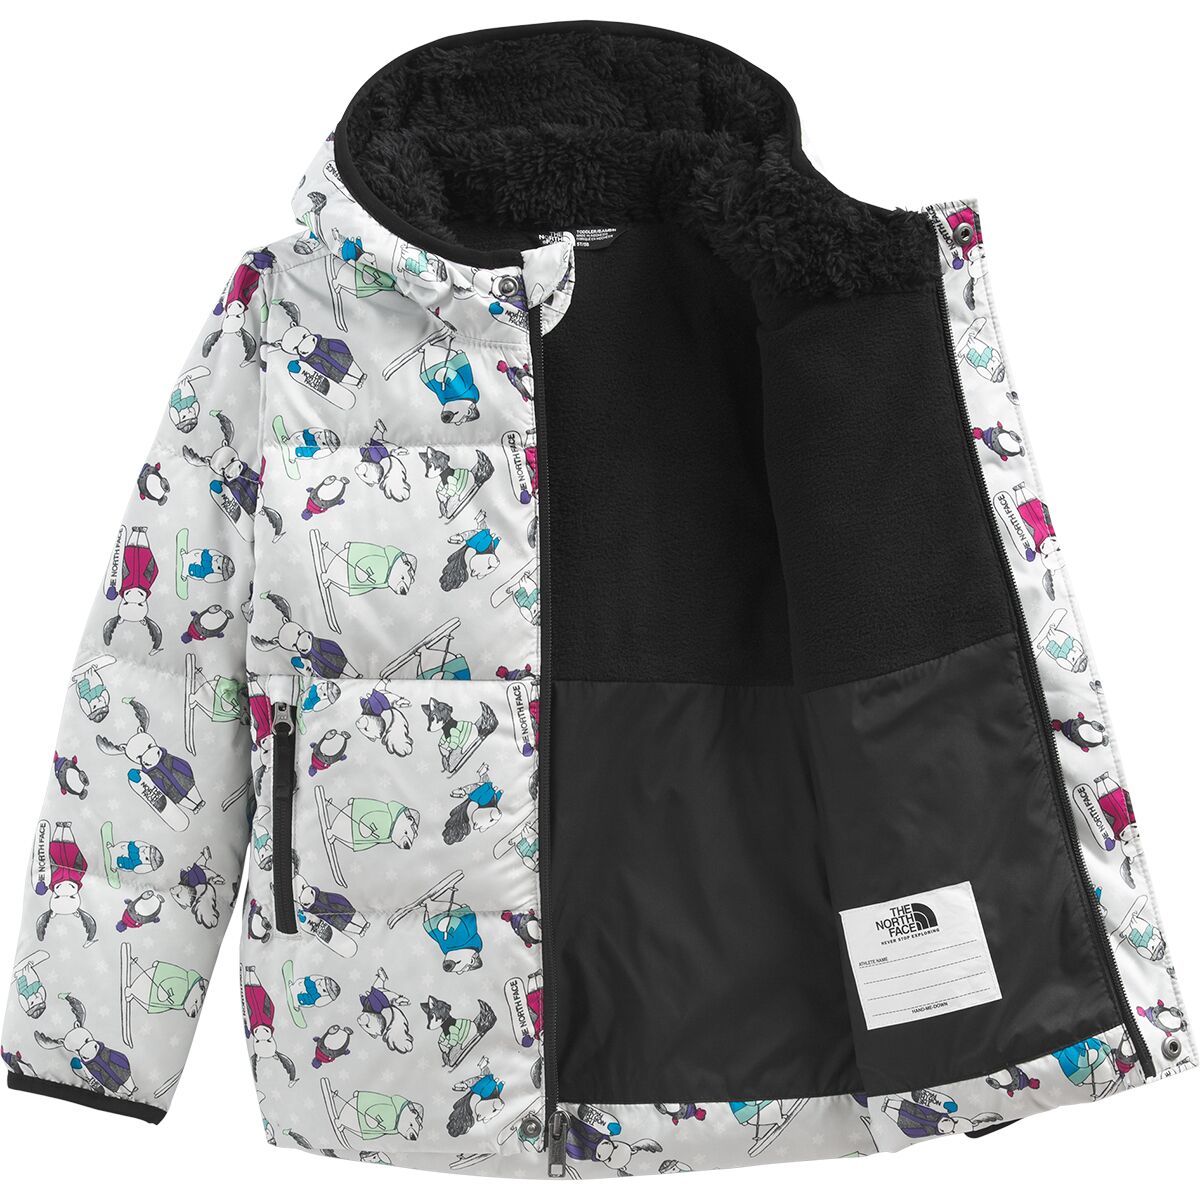 The North Face North Down Hooded Jacket - Toddlers'